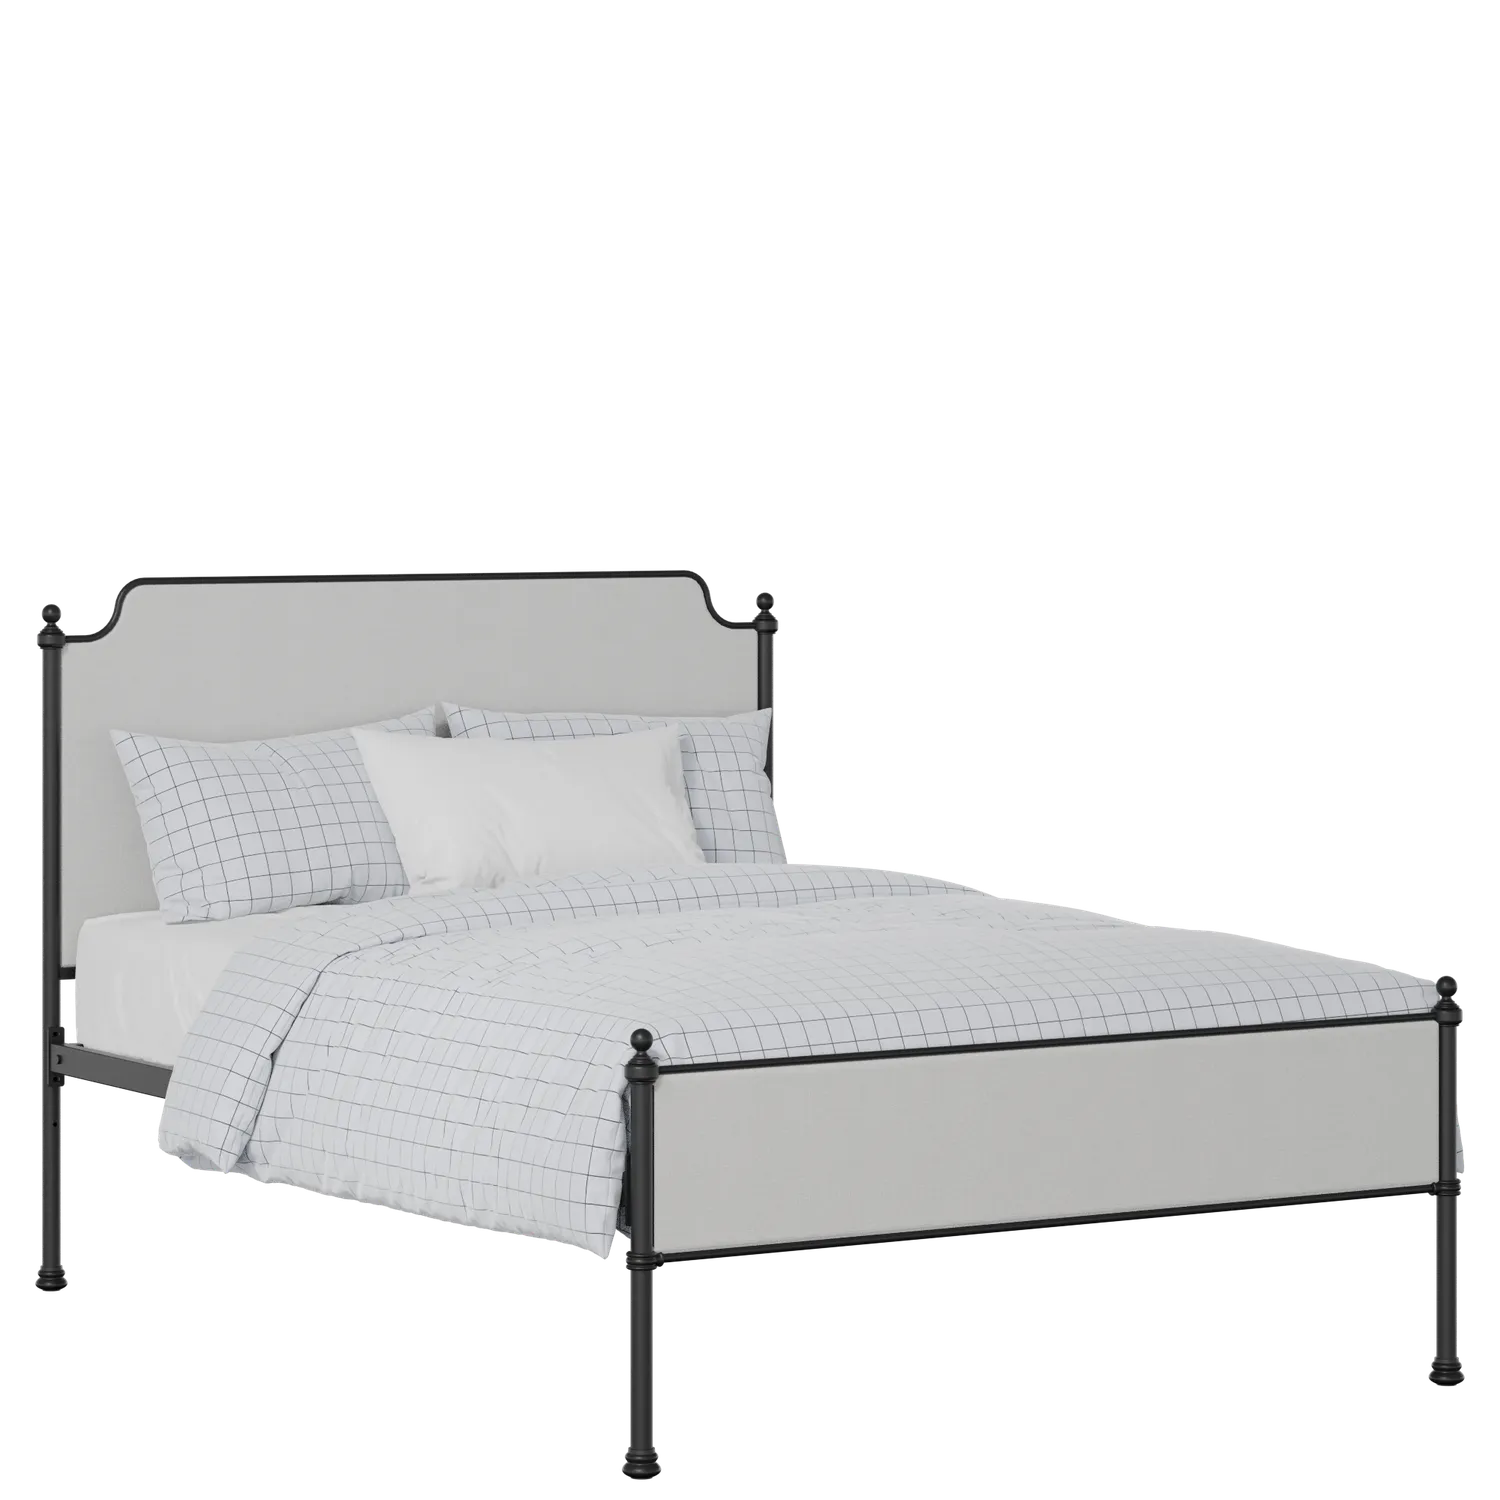 Miranda Slim iron/metal upholstered bed in black with silver fabric